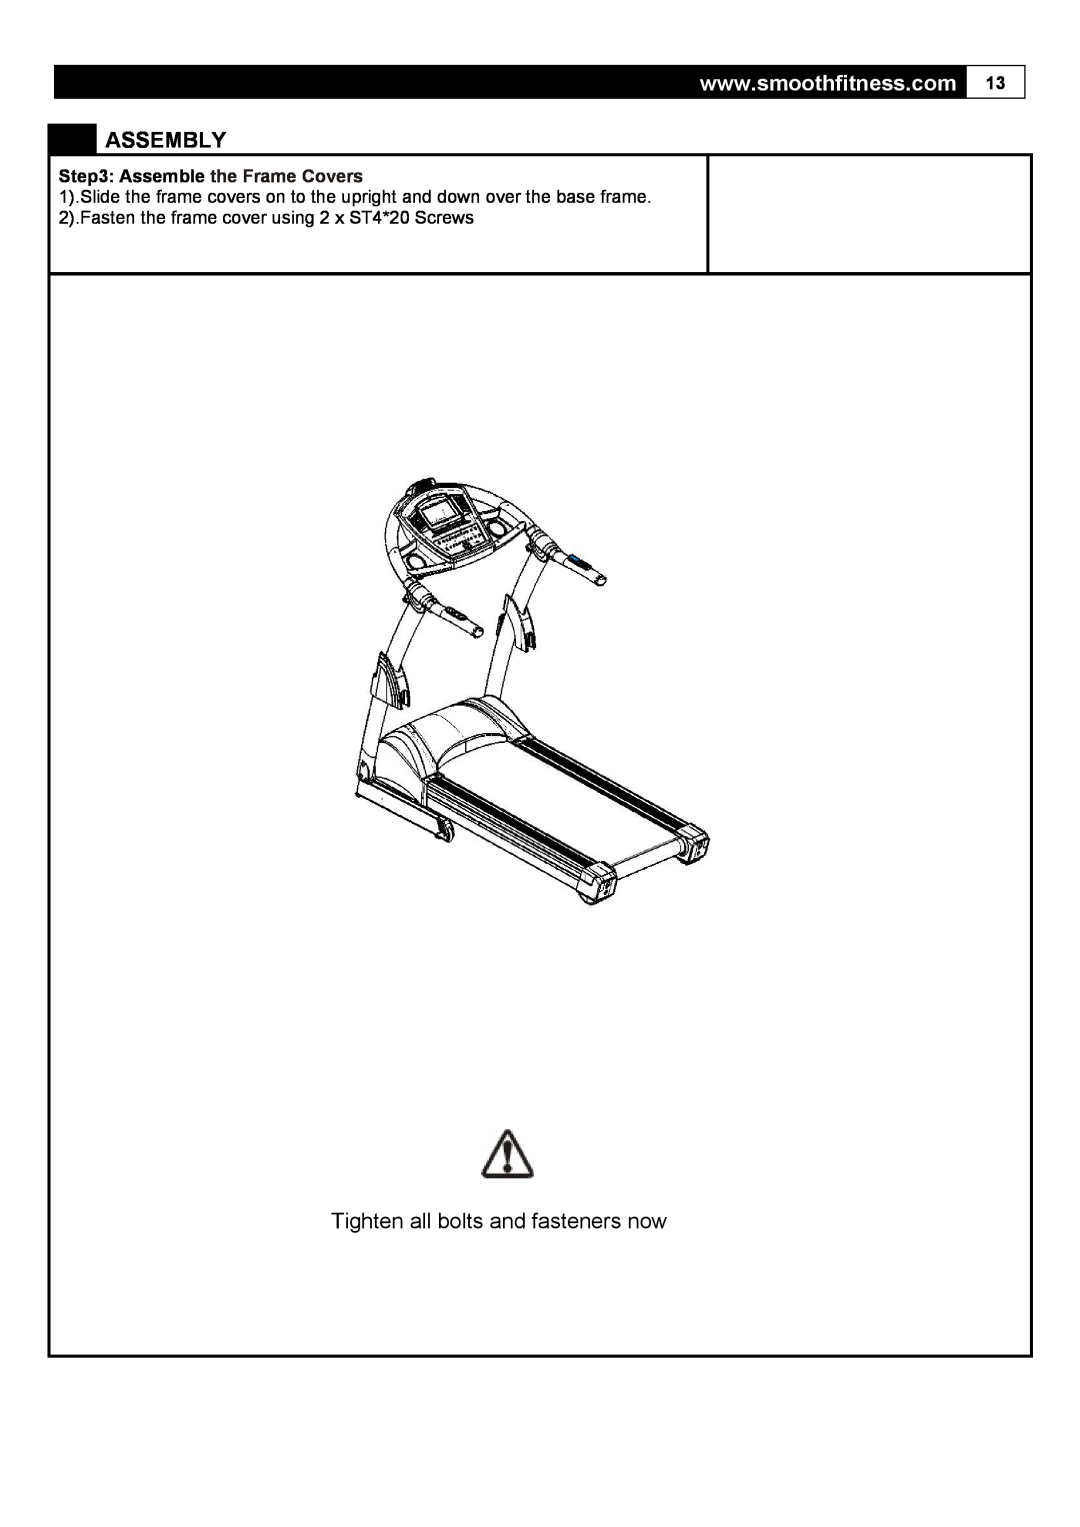 Smooth Fitness 5.65I user manual Assembly, Assemble the Frame Covers, Fasten the frame cover using 2 x ST4*20 Screws 